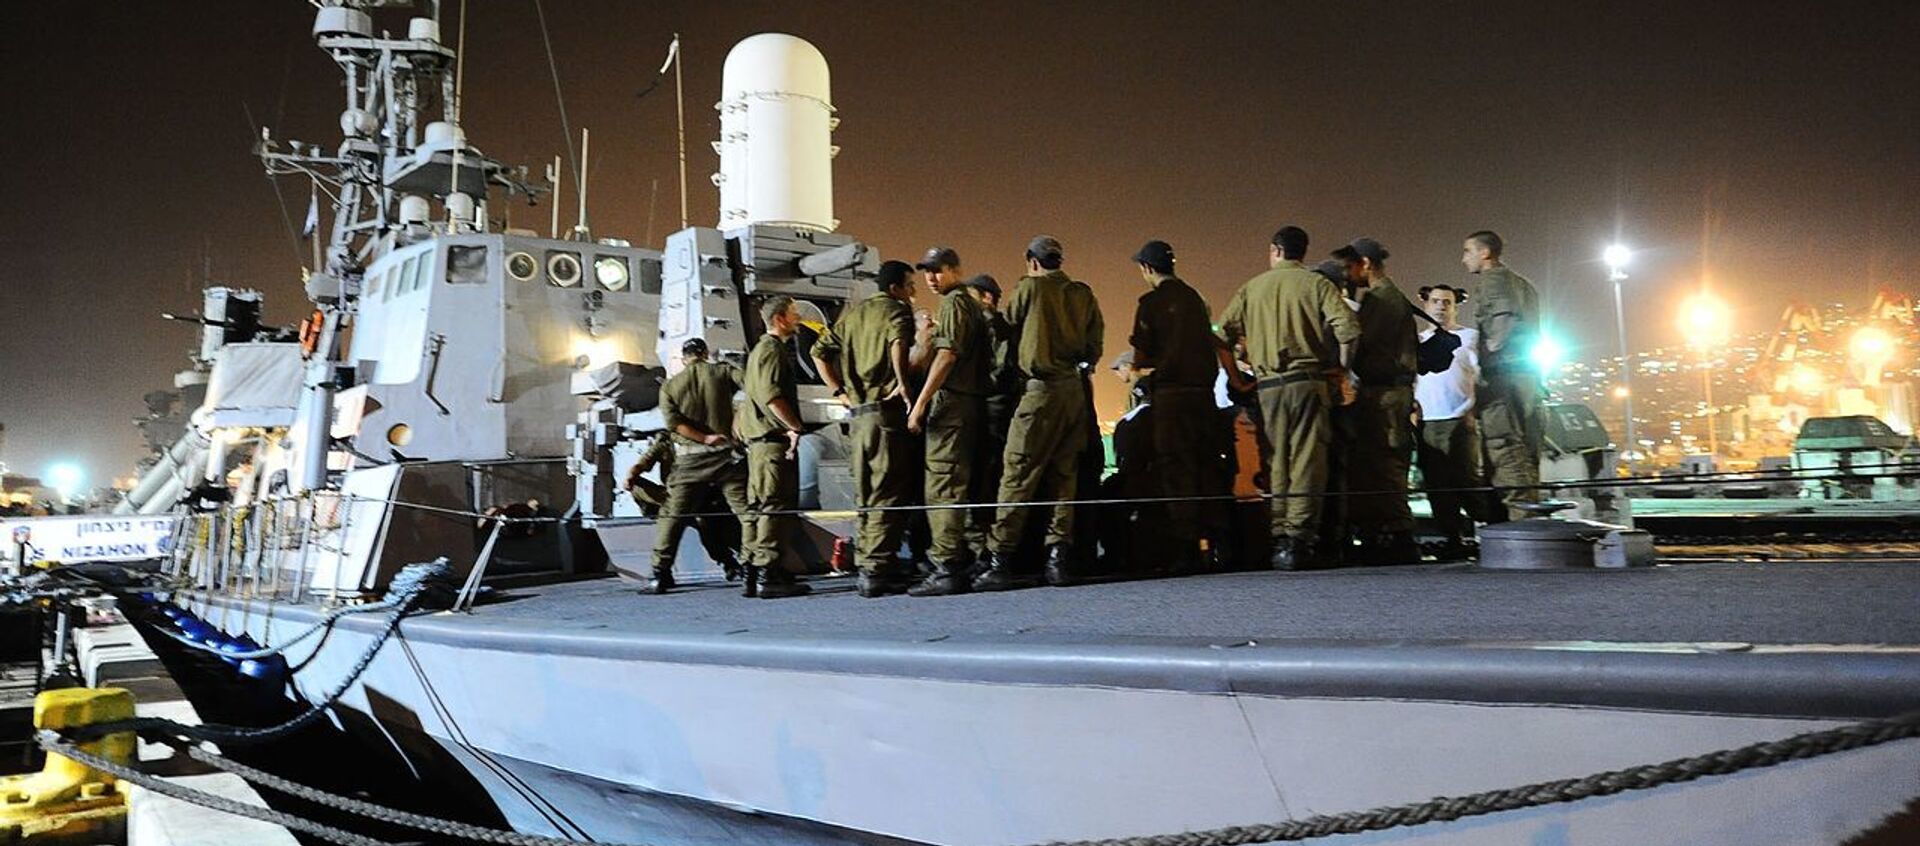 IDF Naval Forces prepare to implement the Israeli government's decision to prevent the flotilla from breaching the maritime closure on the Gaza Strip - Sputnik International, 1920, 10.08.2021